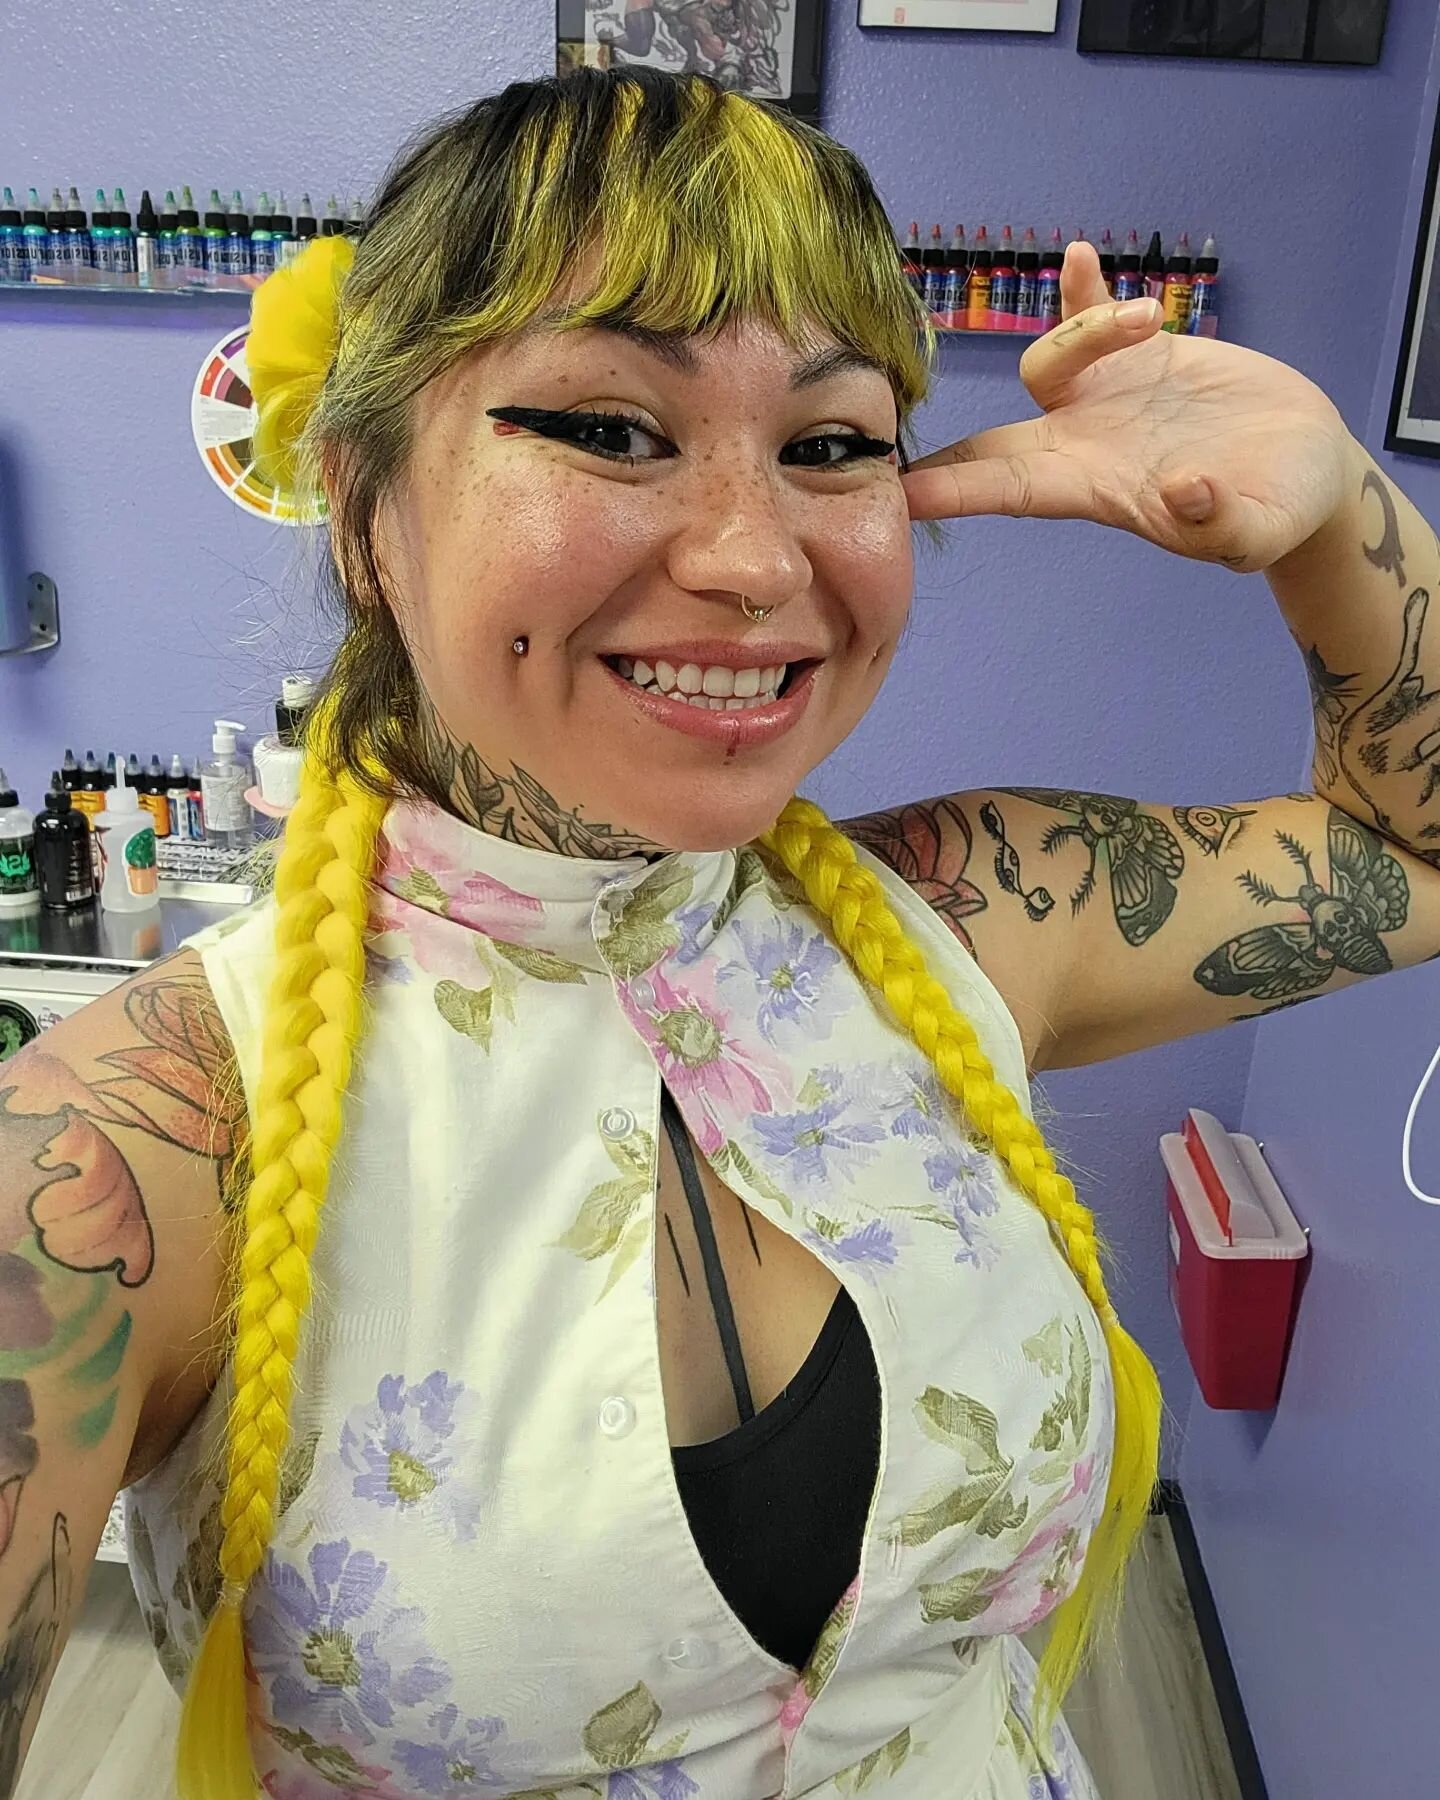 Haven't done a 🥰 Self Sunday 🥰 in a minute, so here we go....Embracing yellow and braid ins as the weather's been hot. 
Showing off some of the hella awesome earrings I got from the Ascending Lotus Craft Faire. And got to finally see Dinolandia bef